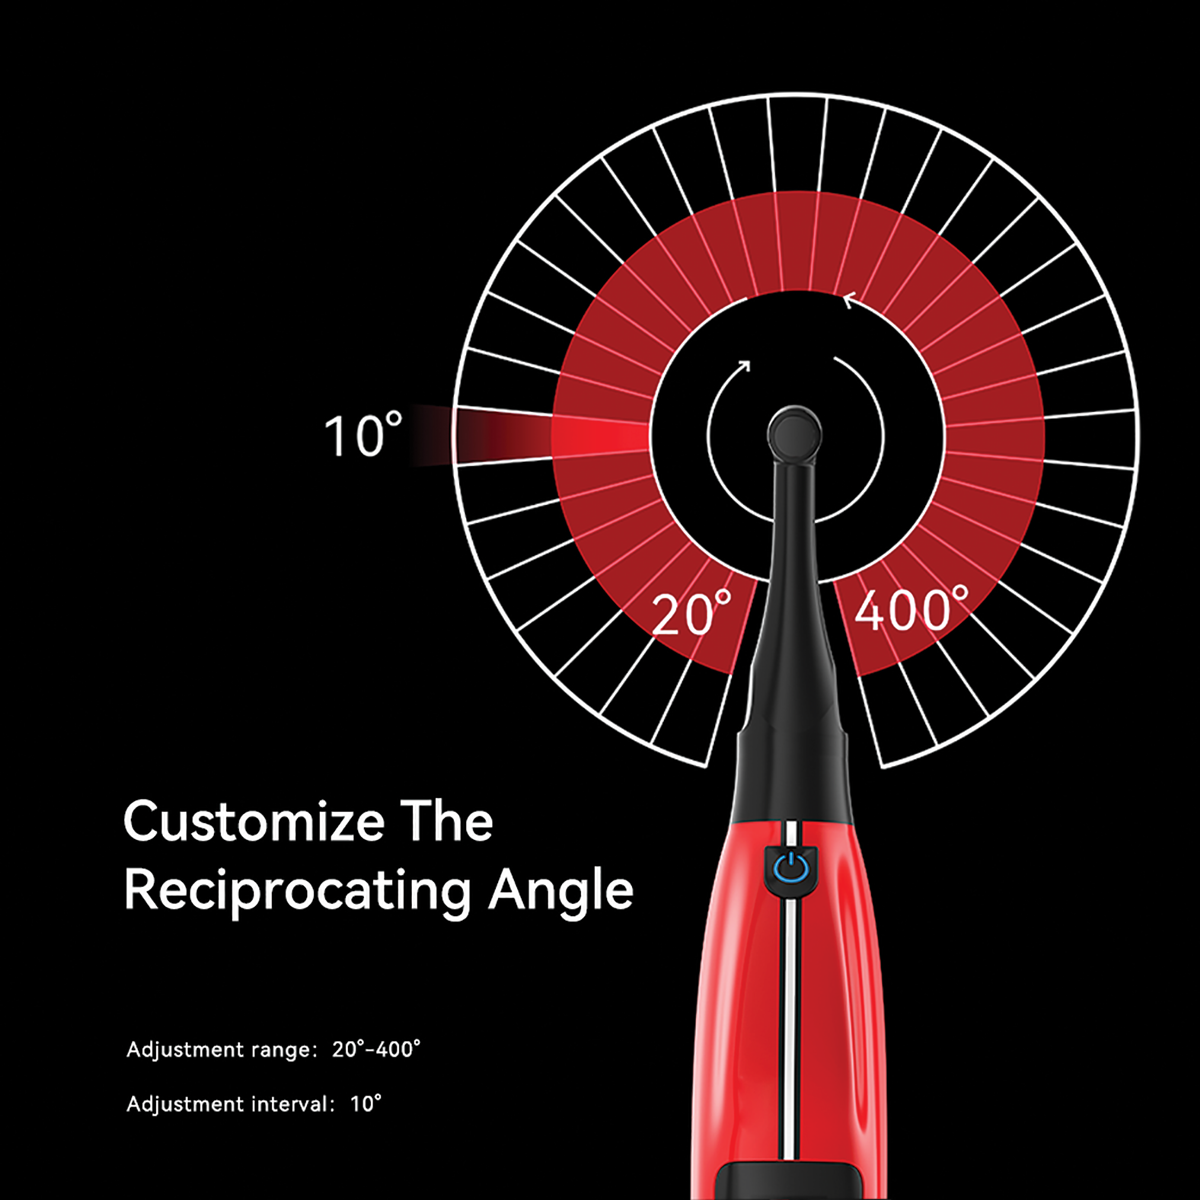 Customize the Reciprocating Angle